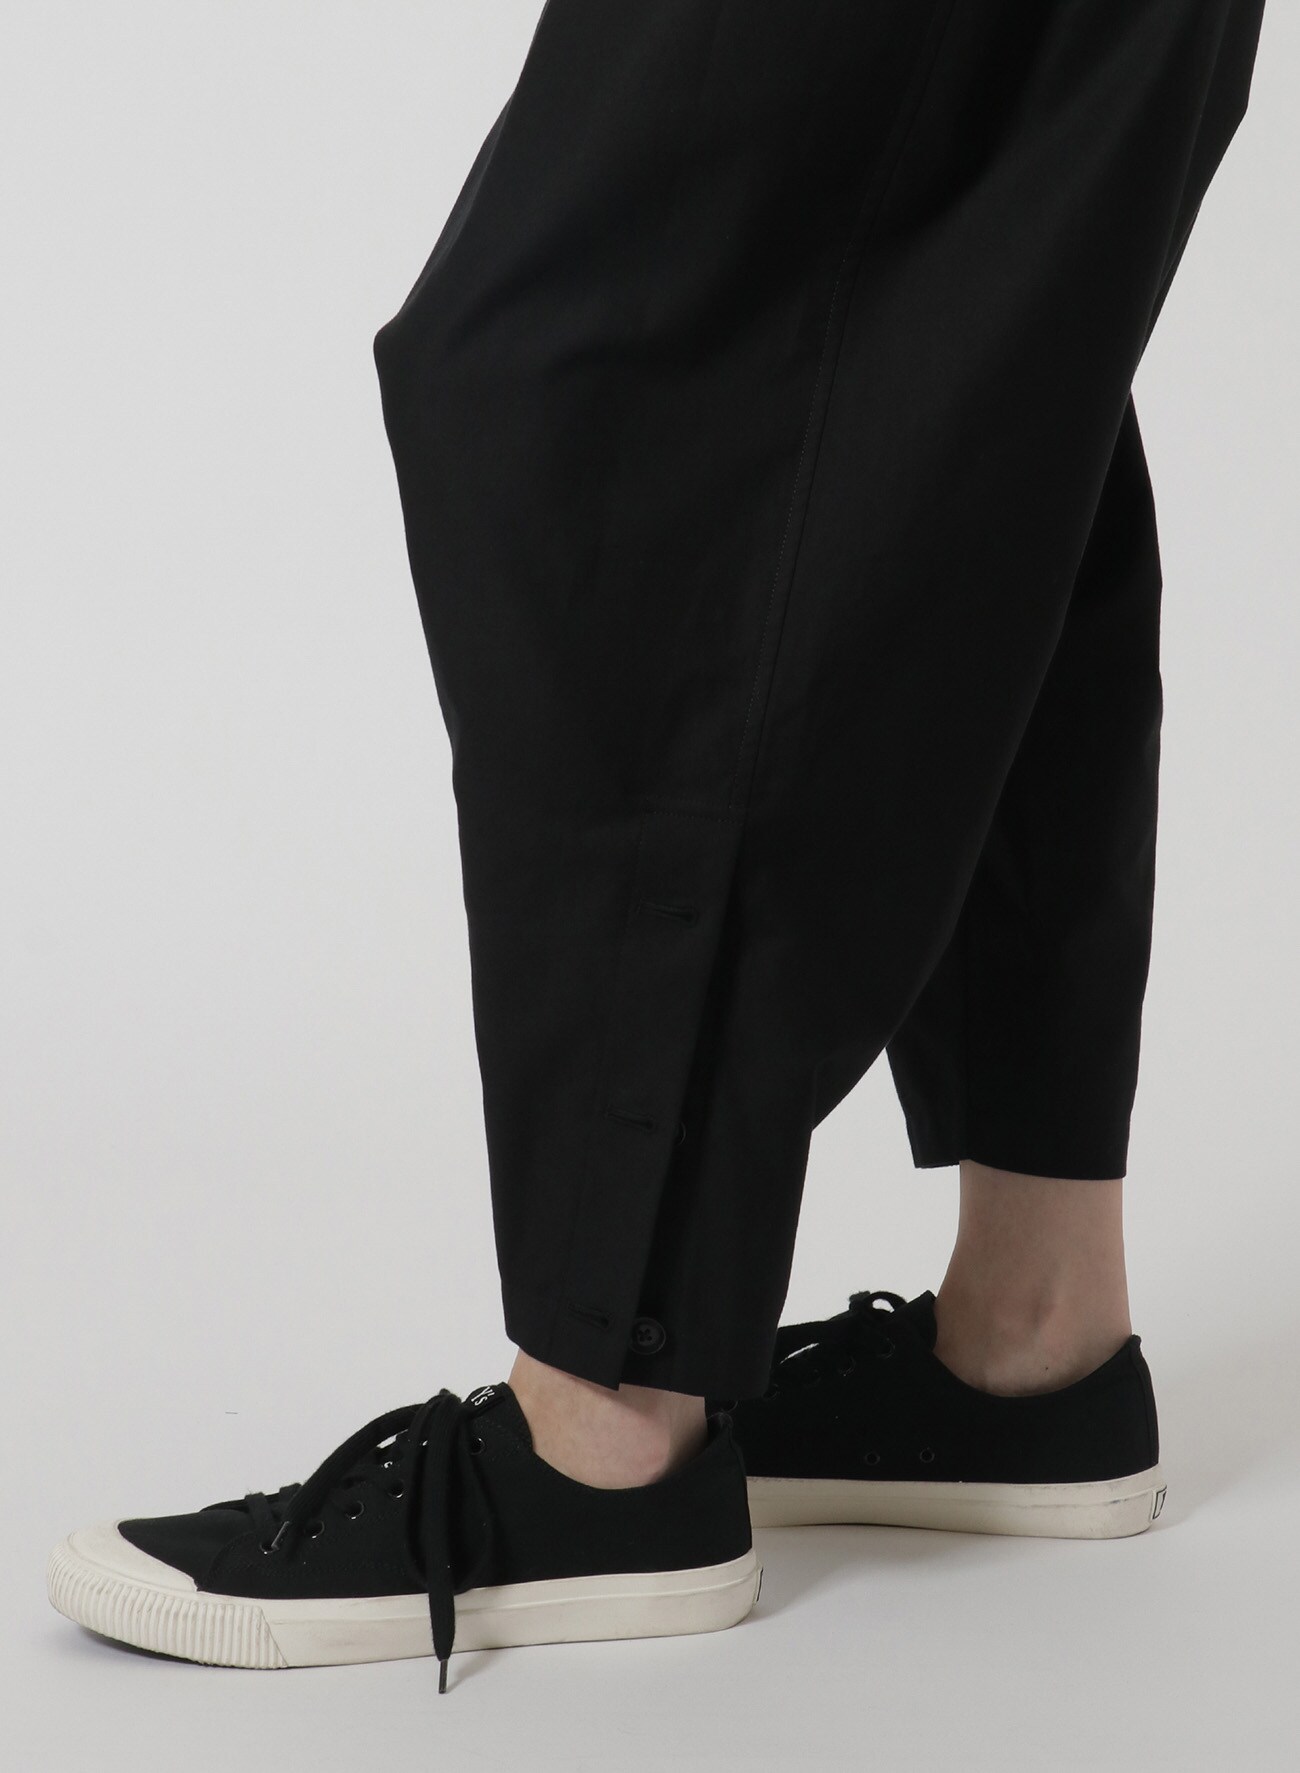 [Y's-Black Name] BLACK TWILL SAROUEL PANTS WITH BUTTON-UP HEMS